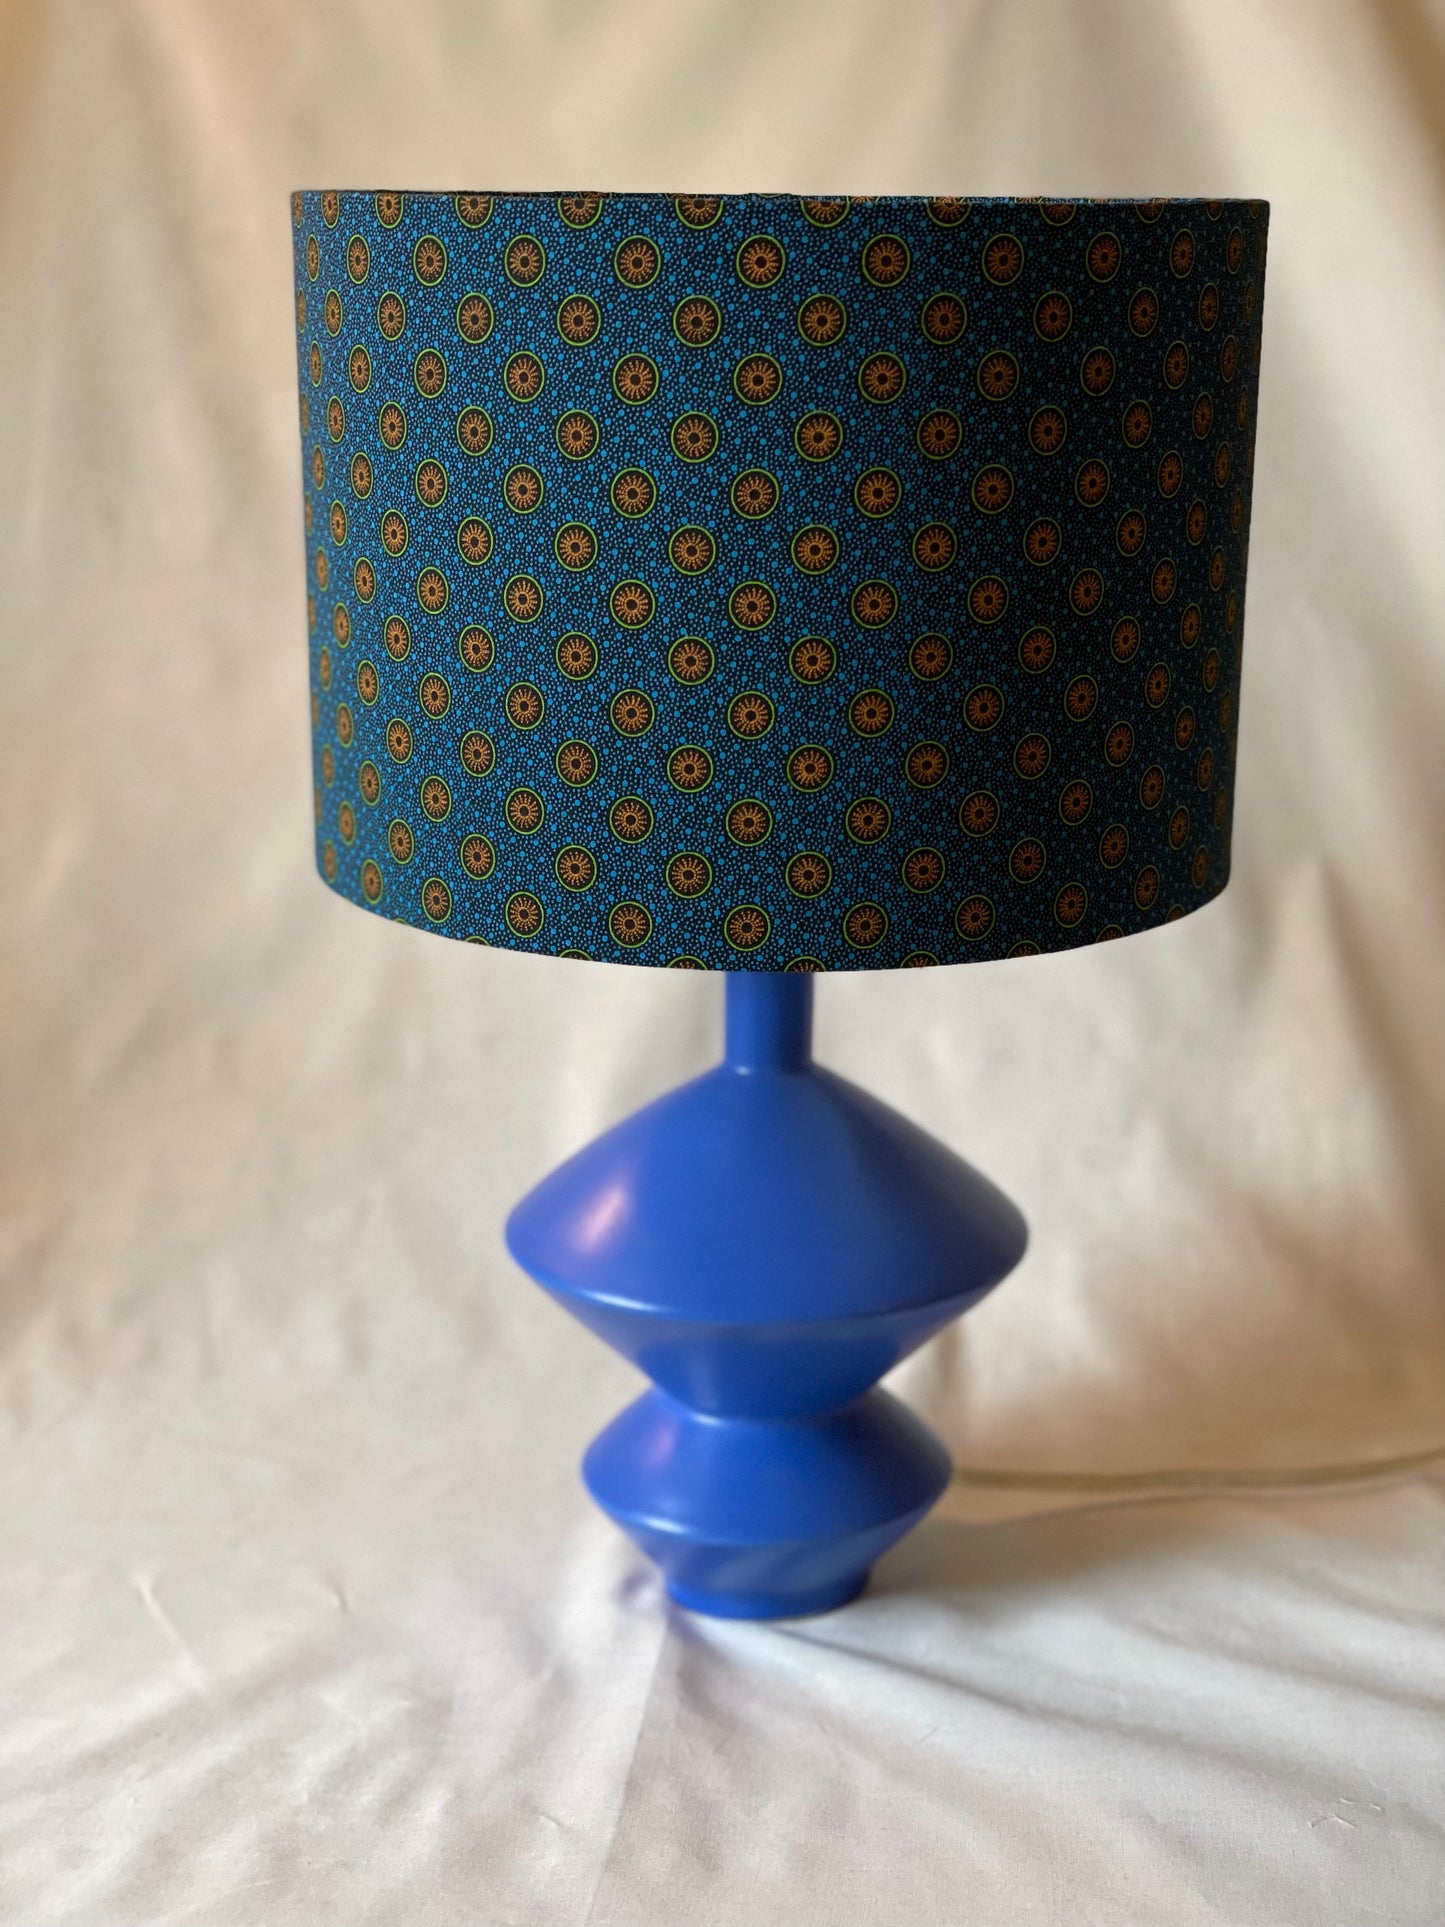 10 inch Drum Lampshade. Dynamic South African Shwe Shwe Print- Navy Blue with Orange and Green Medallion and Tiny Blue Dots.